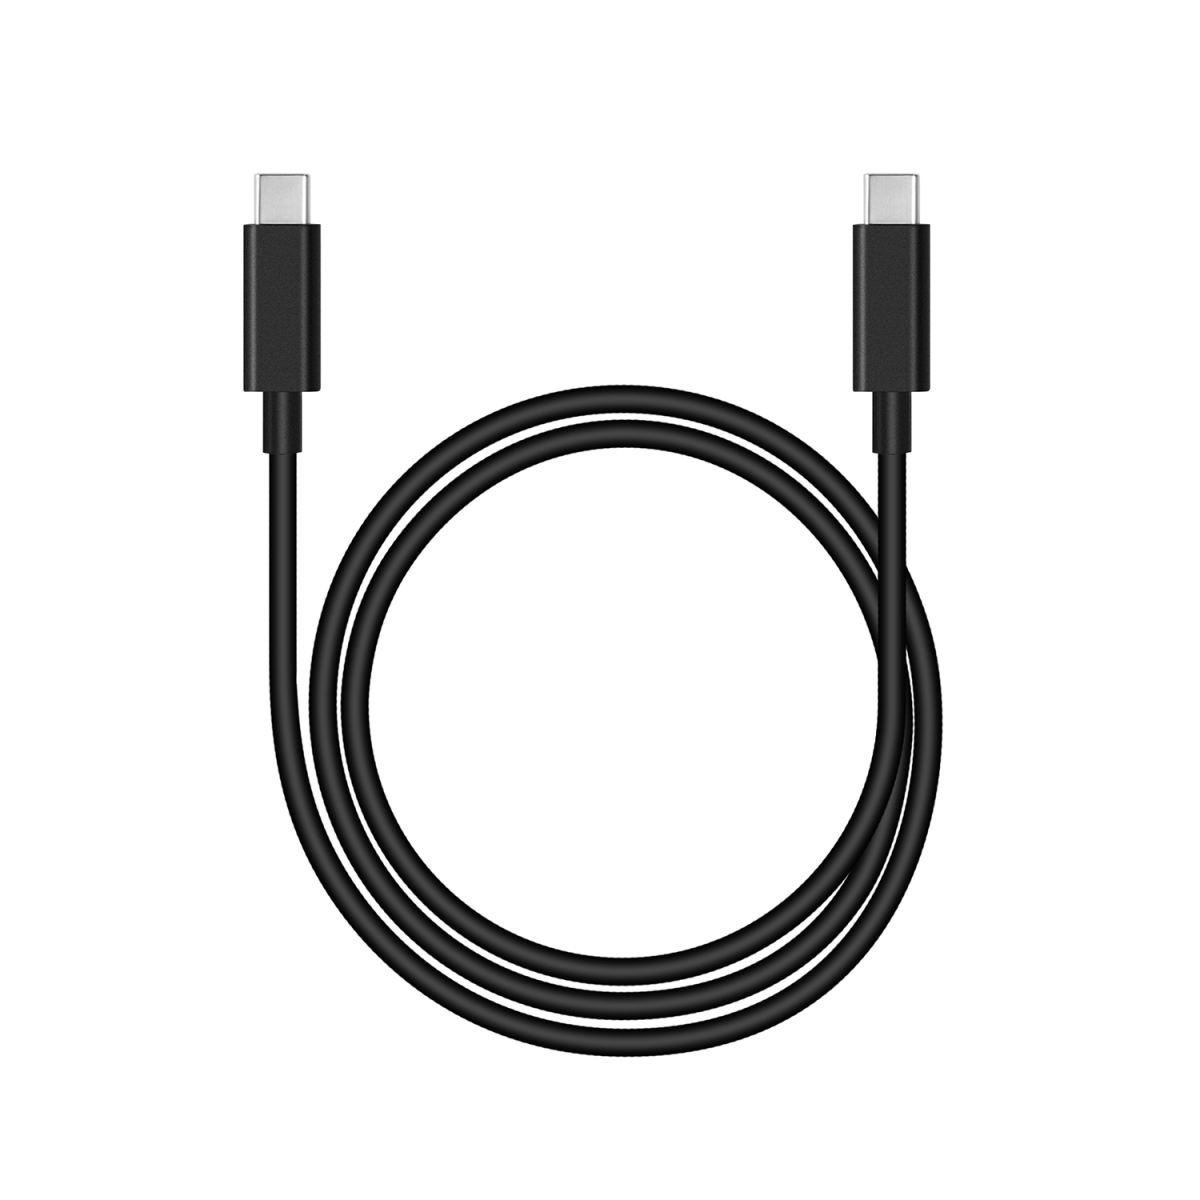 USB-C to USB-C Cable for Huion Kamvas 13 and Kamvas 22 Series  Huion  Official Store: Drawing Tablets, Pen Tablets, Pen Display, Led Light Pad